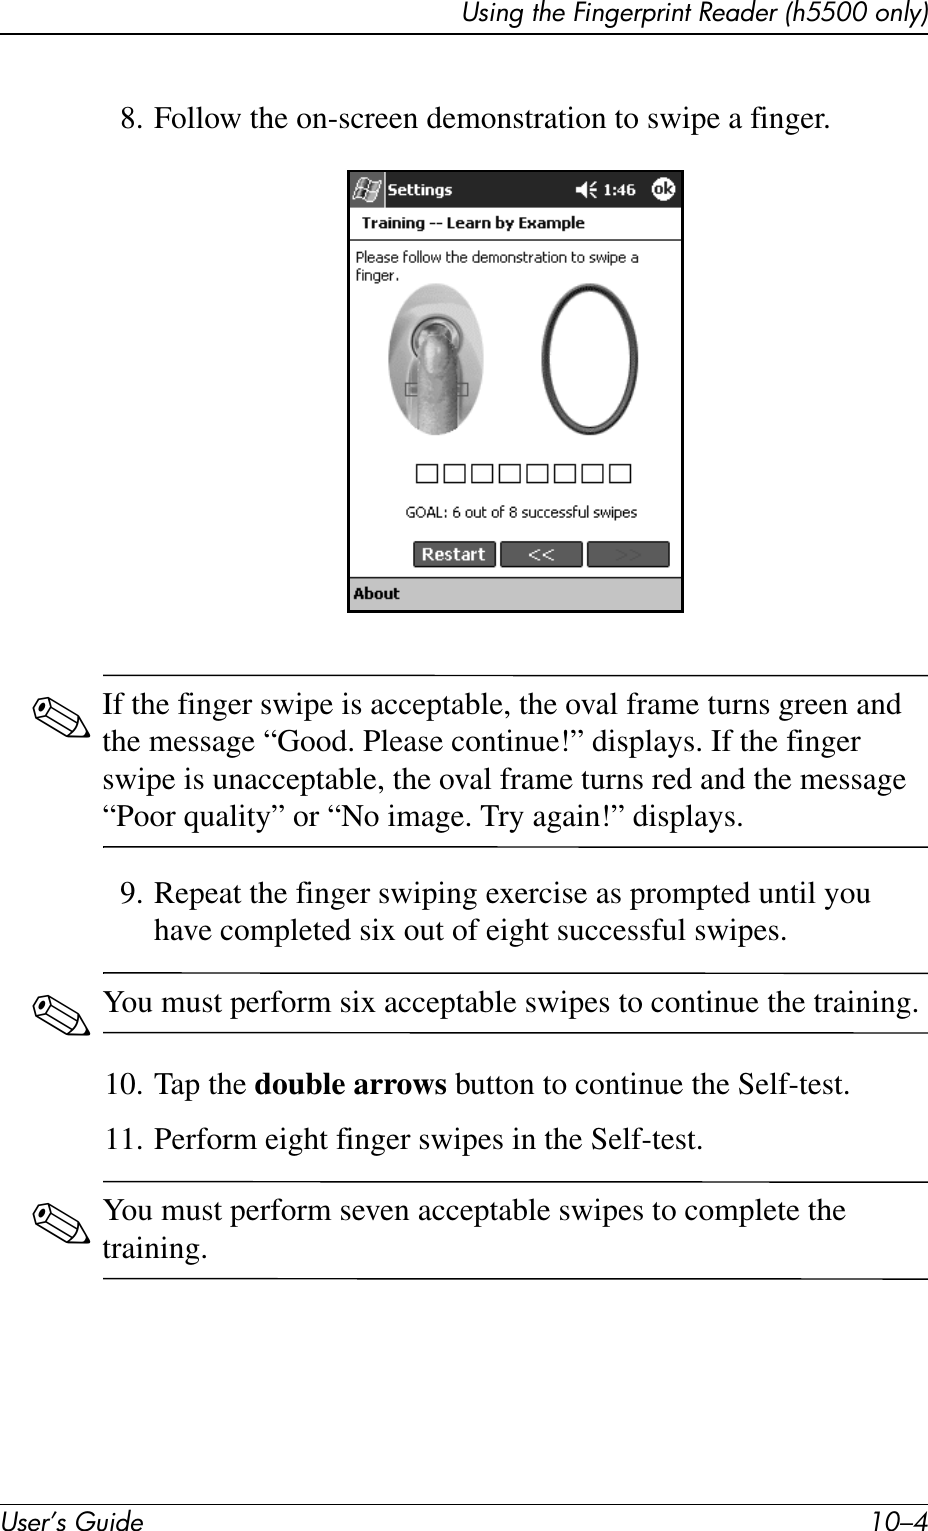 User’s Guide 10–4Using the Fingerprint Reader (h5500 only)8. Follow the on-screen demonstration to swipe a finger.✎If the finger swipe is acceptable, the oval frame turns green and the message “Good. Please continue!” displays. If the finger swipe is unacceptable, the oval frame turns red and the message “Poor quality” or “No image. Try again!” displays.9. Repeat the finger swiping exercise as prompted until you have completed six out of eight successful swipes.✎You must perform six acceptable swipes to continue the training.10. Tap the double arrows button to continue the Self-test.11. Perform eight finger swipes in the Self-test.✎You must perform seven acceptable swipes to complete the training.